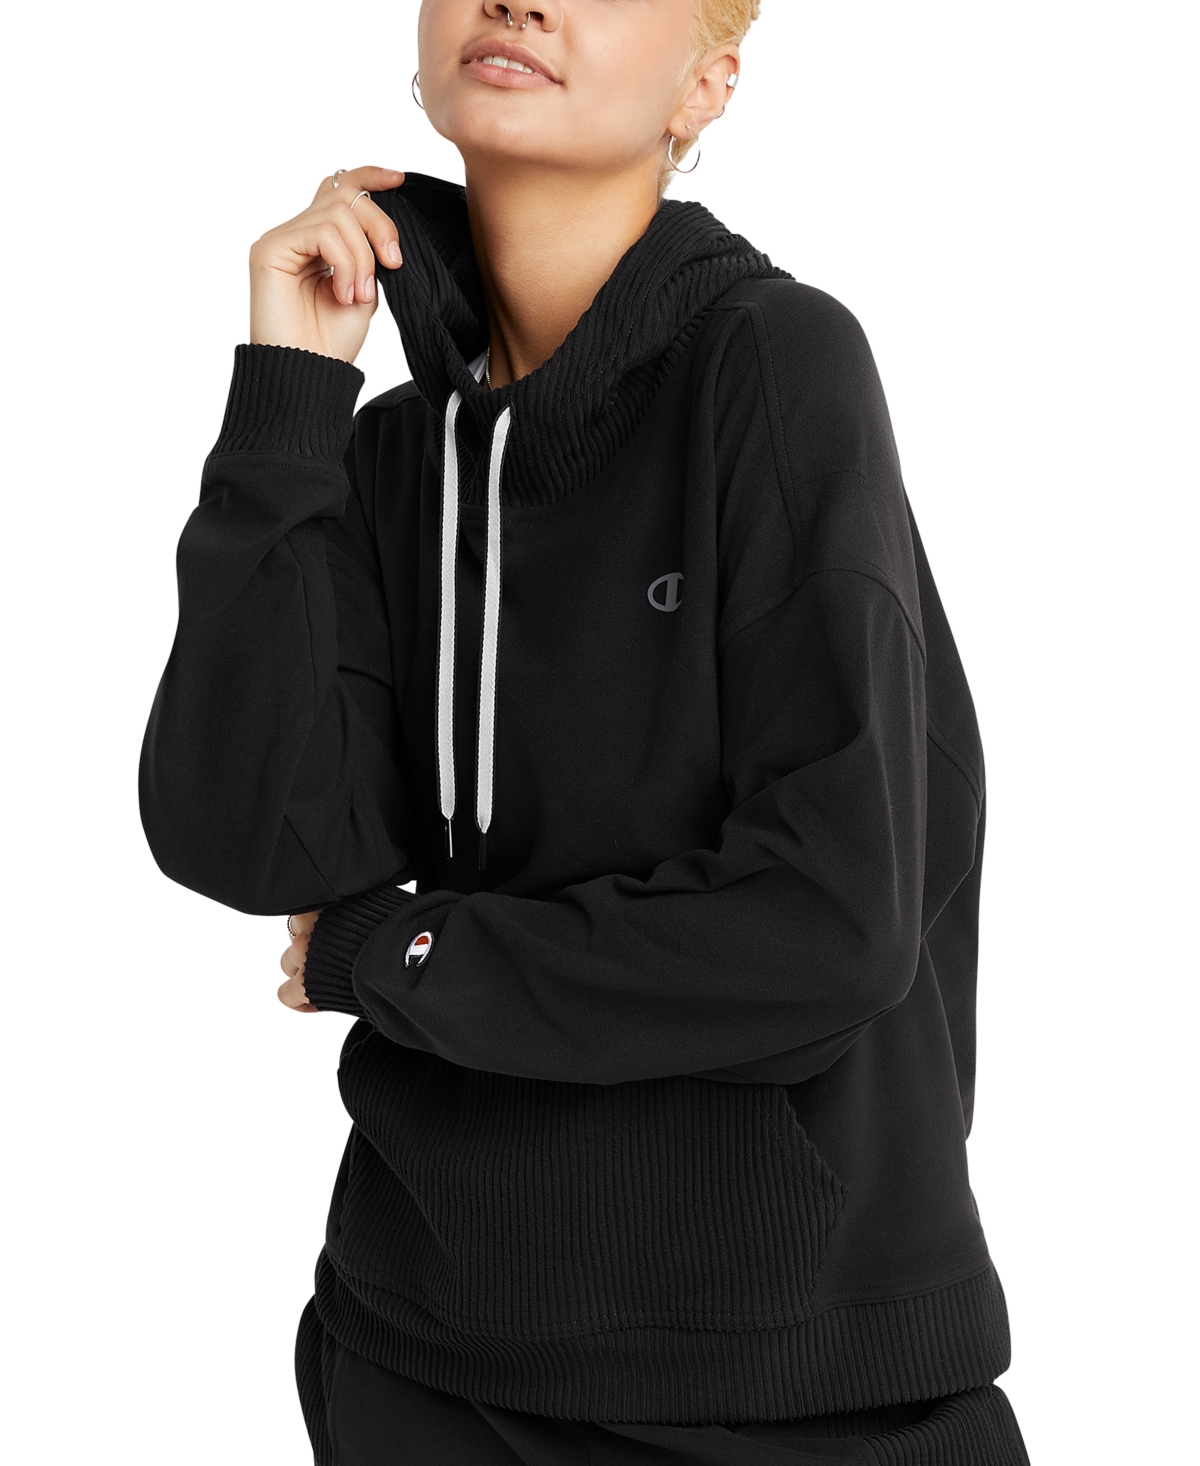 Champion Women's Soft Touch Ribbed Mix Hoodie